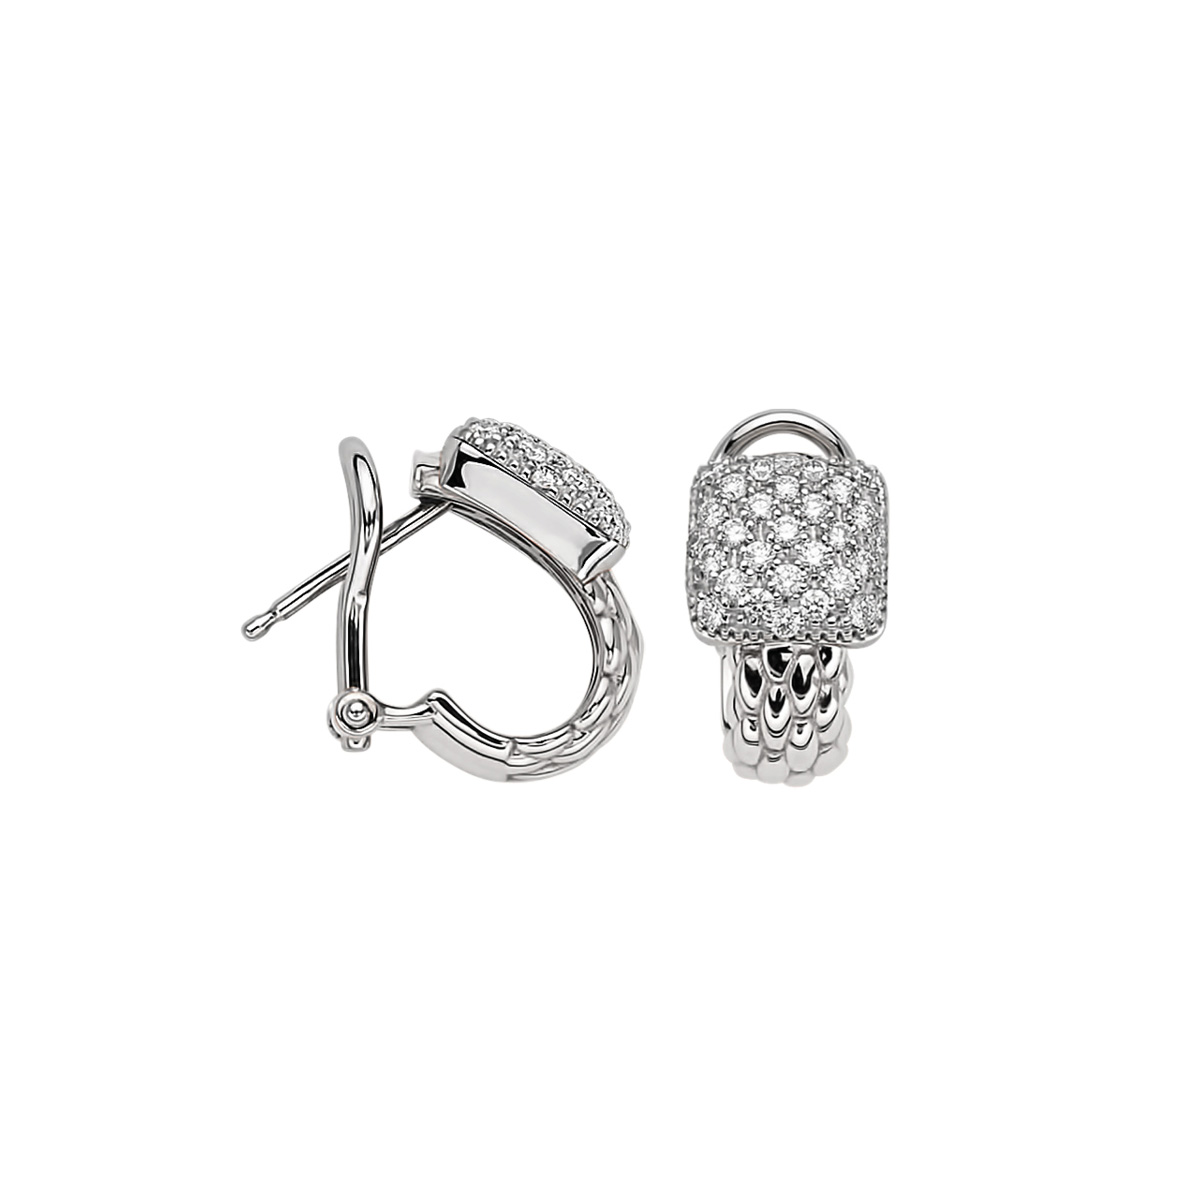 Fope Vendome Collection Earrings in White Gold with 0.77 Carat Diamond Pavè